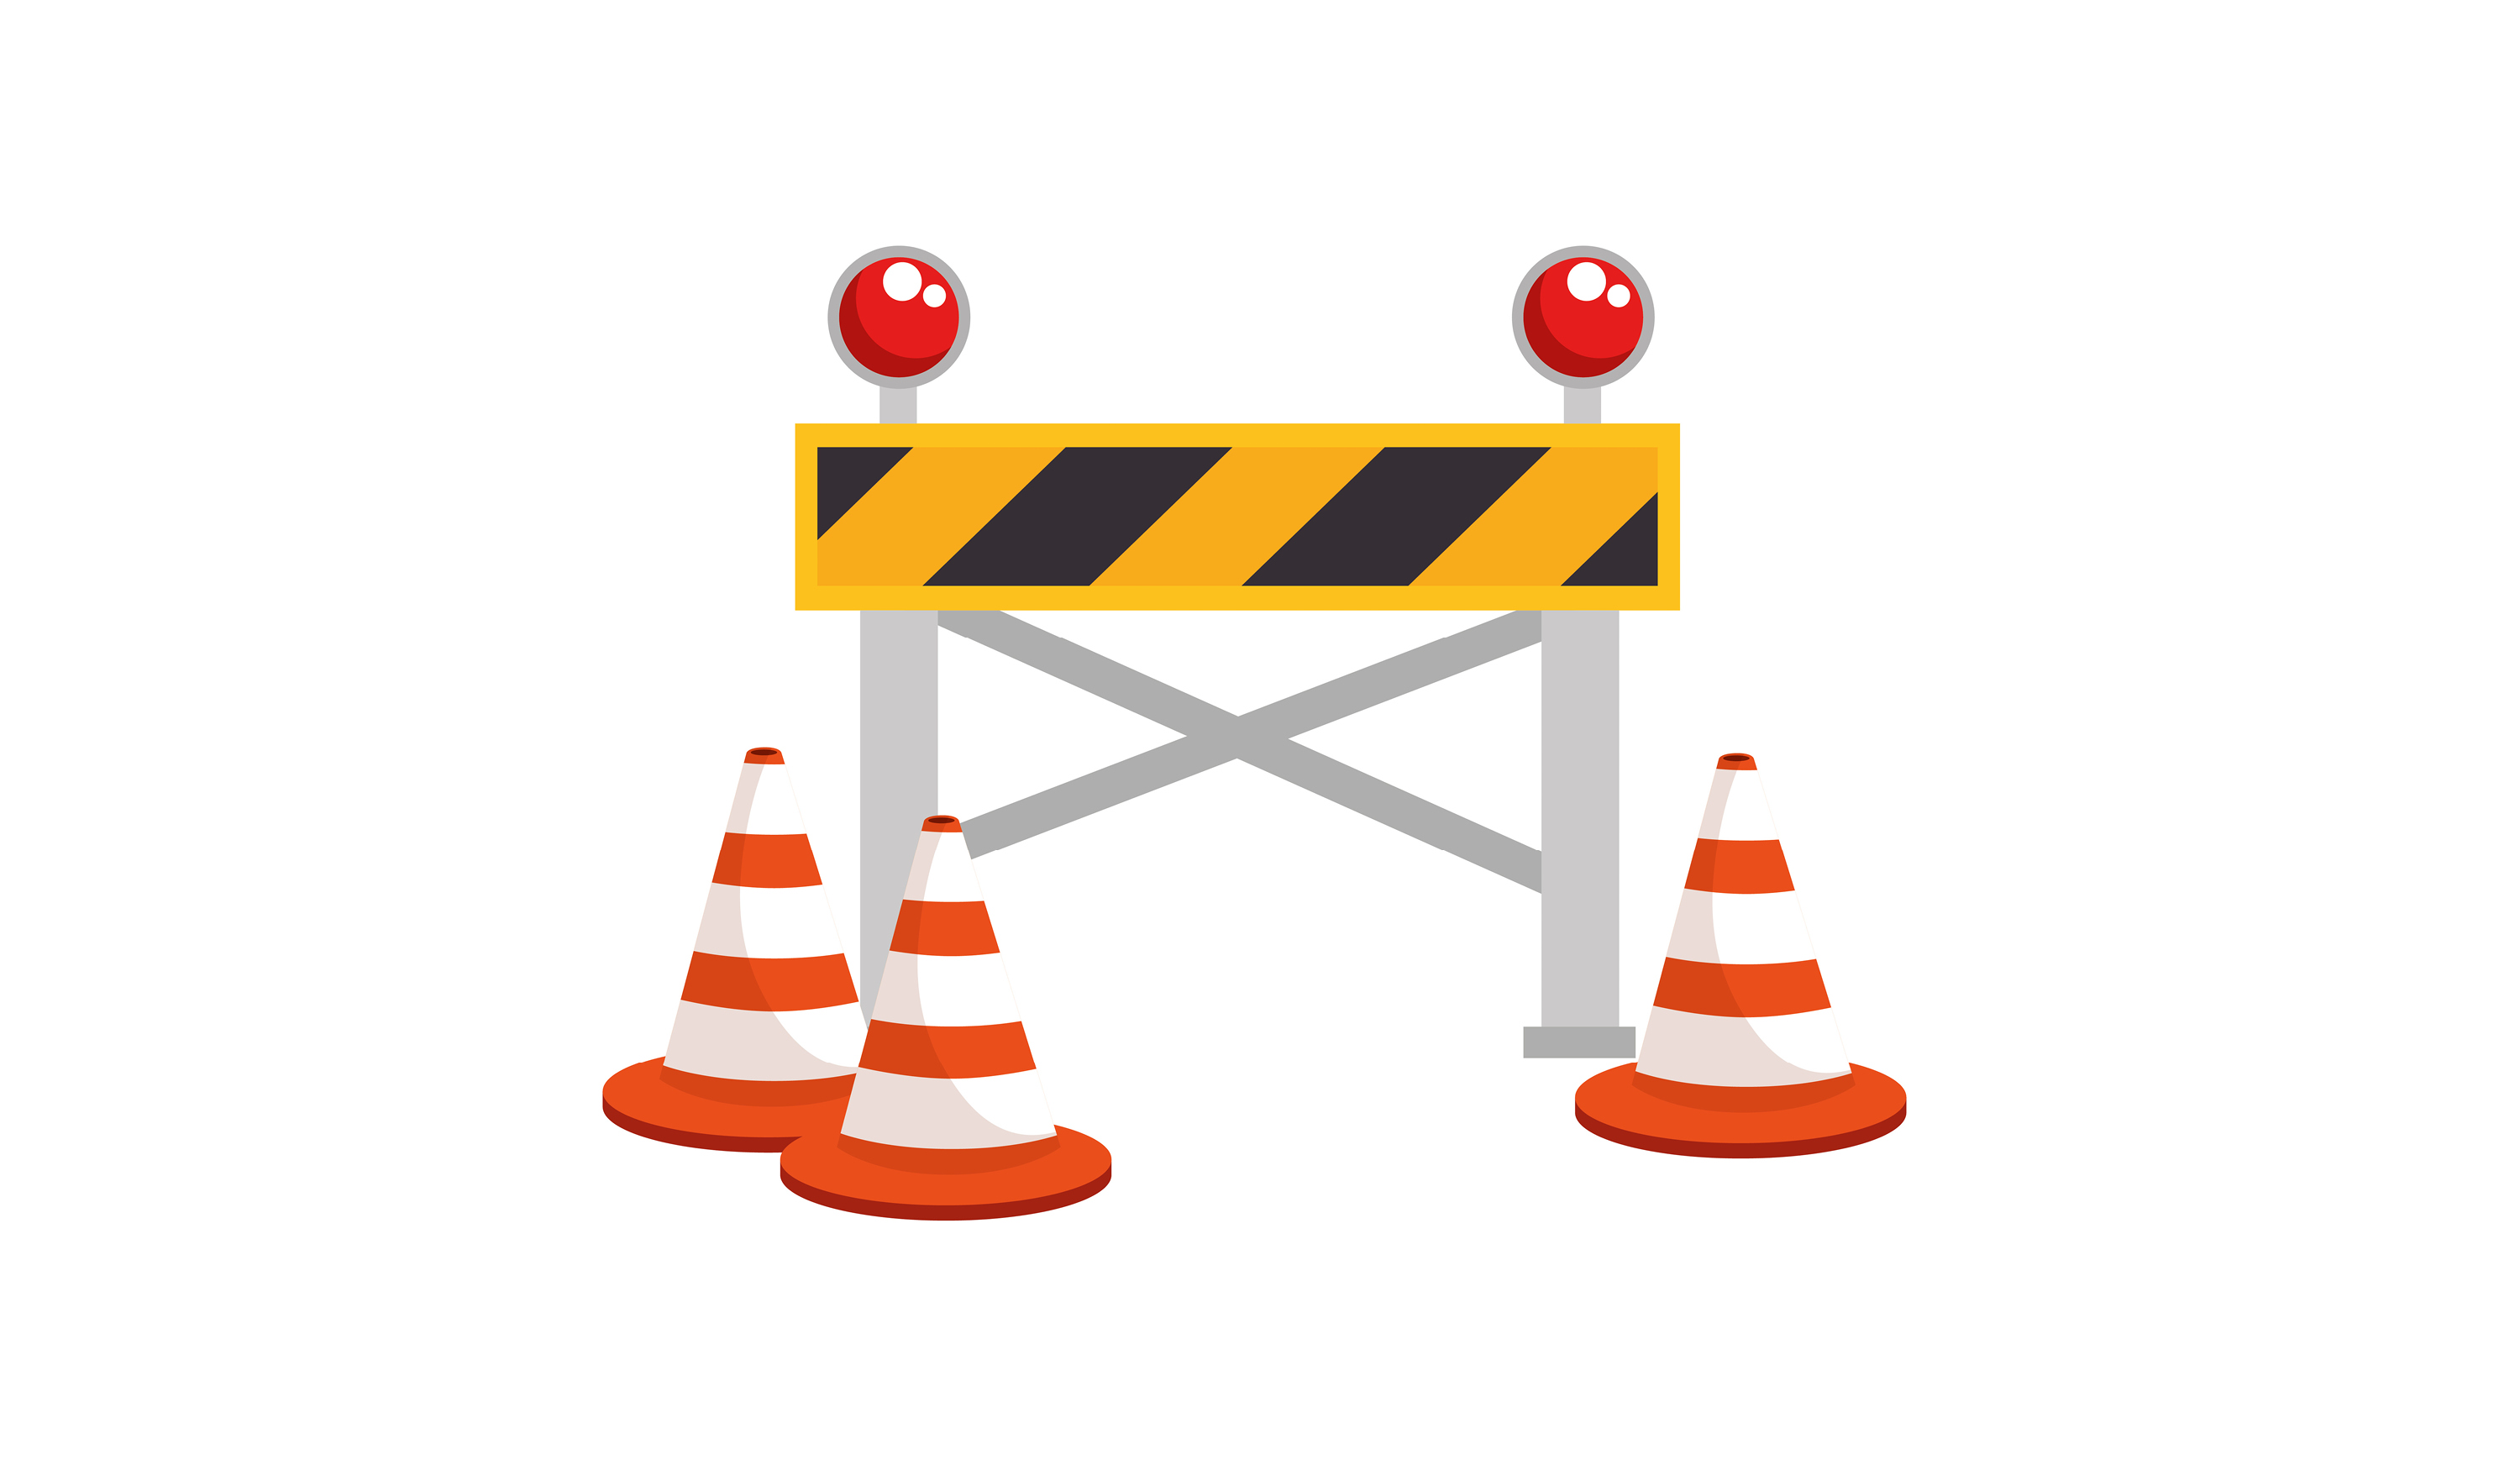 Minor detours scheduled due to pavement works